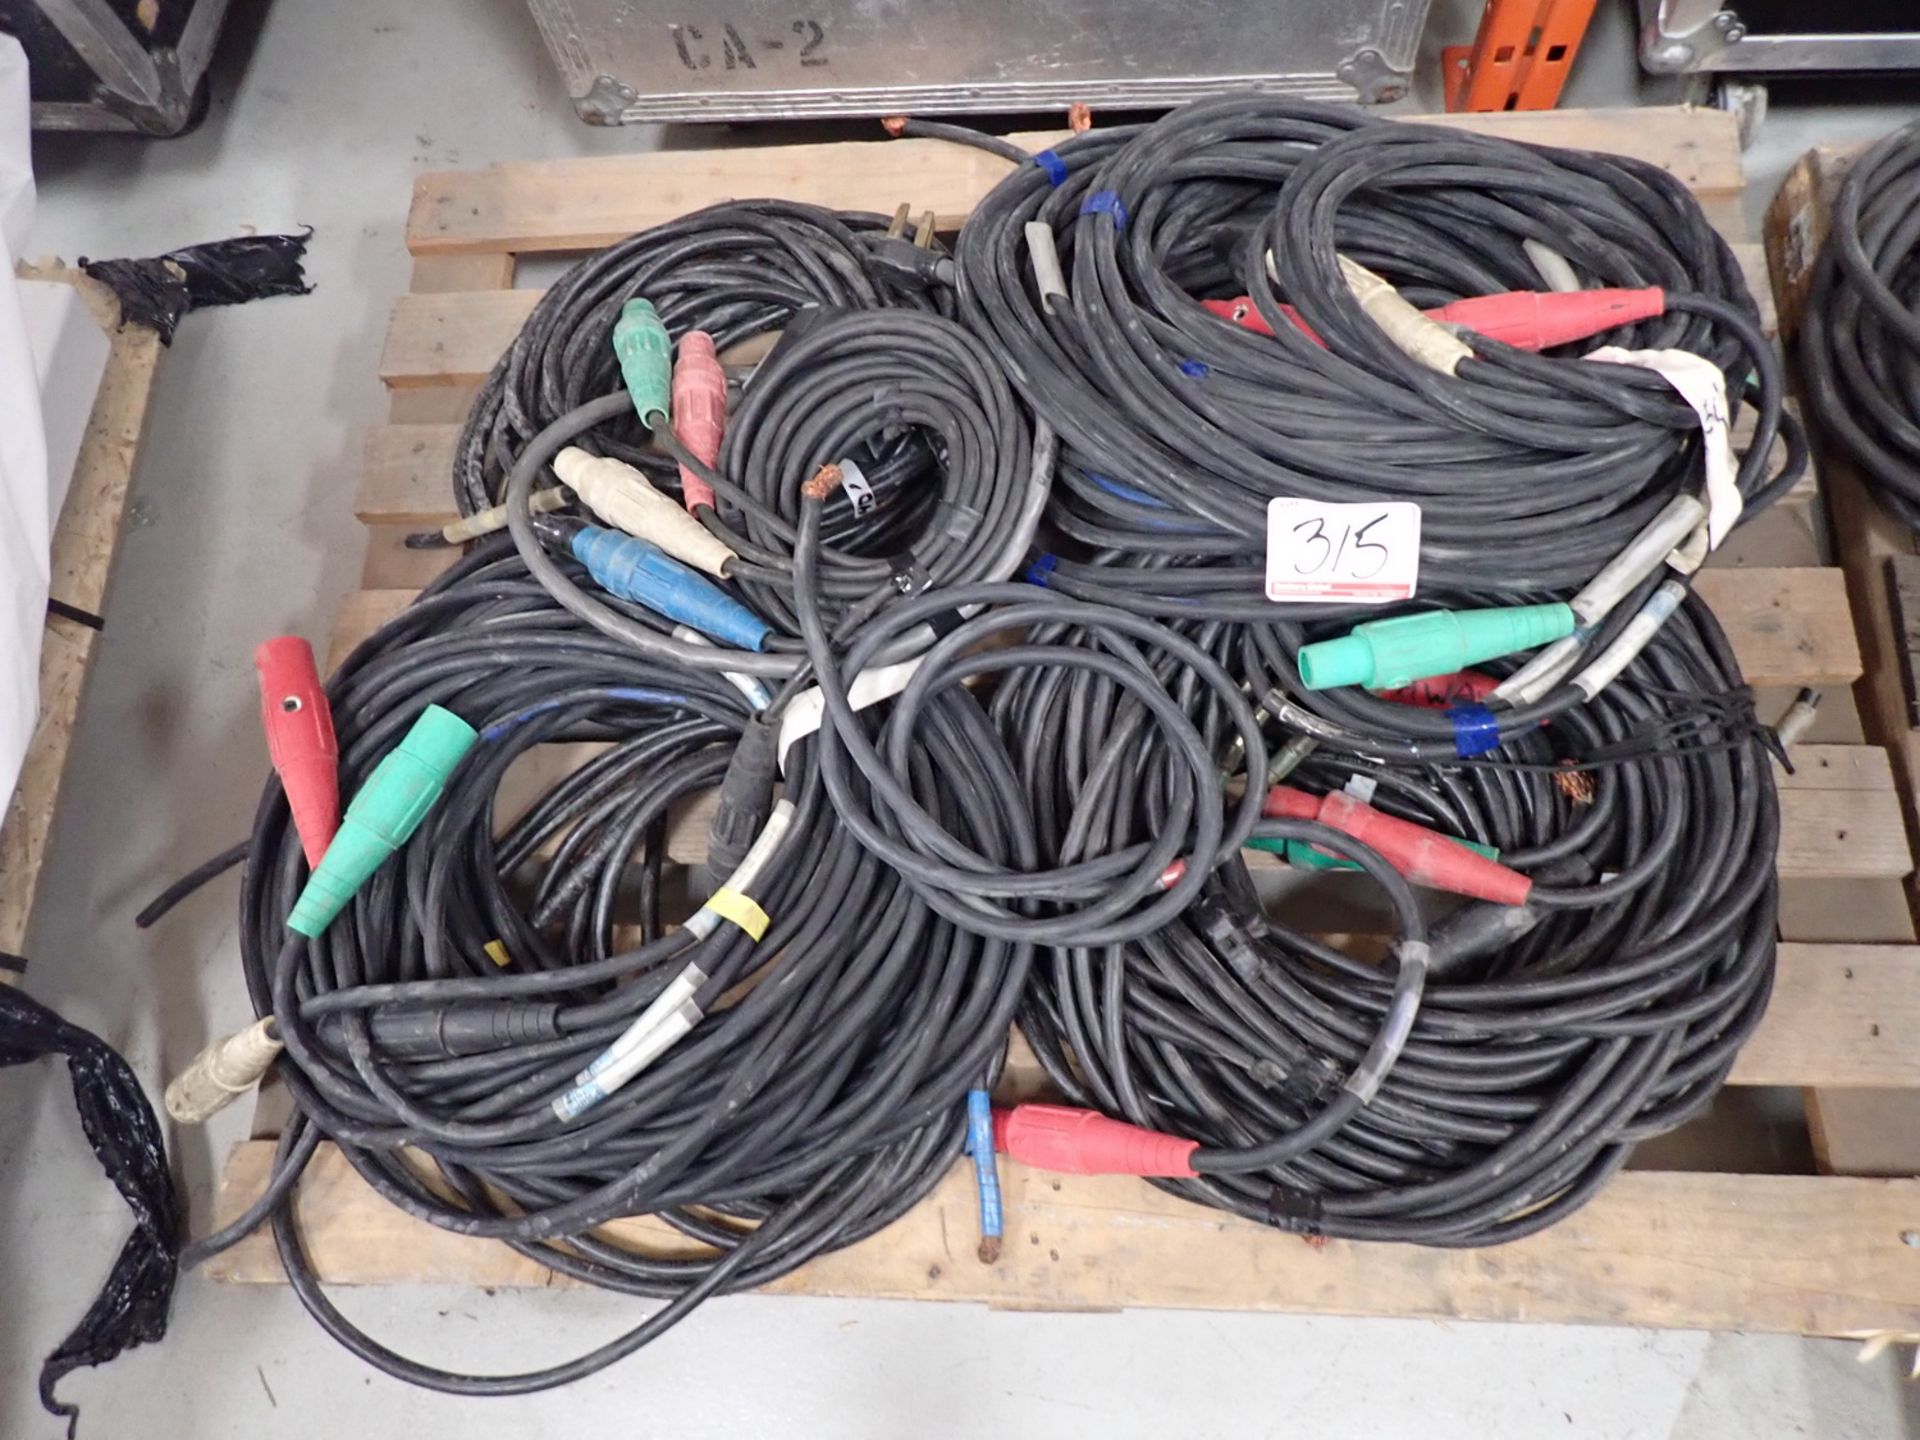 LOT - CAMLOCK FEEDER CABLE (1 SKID)